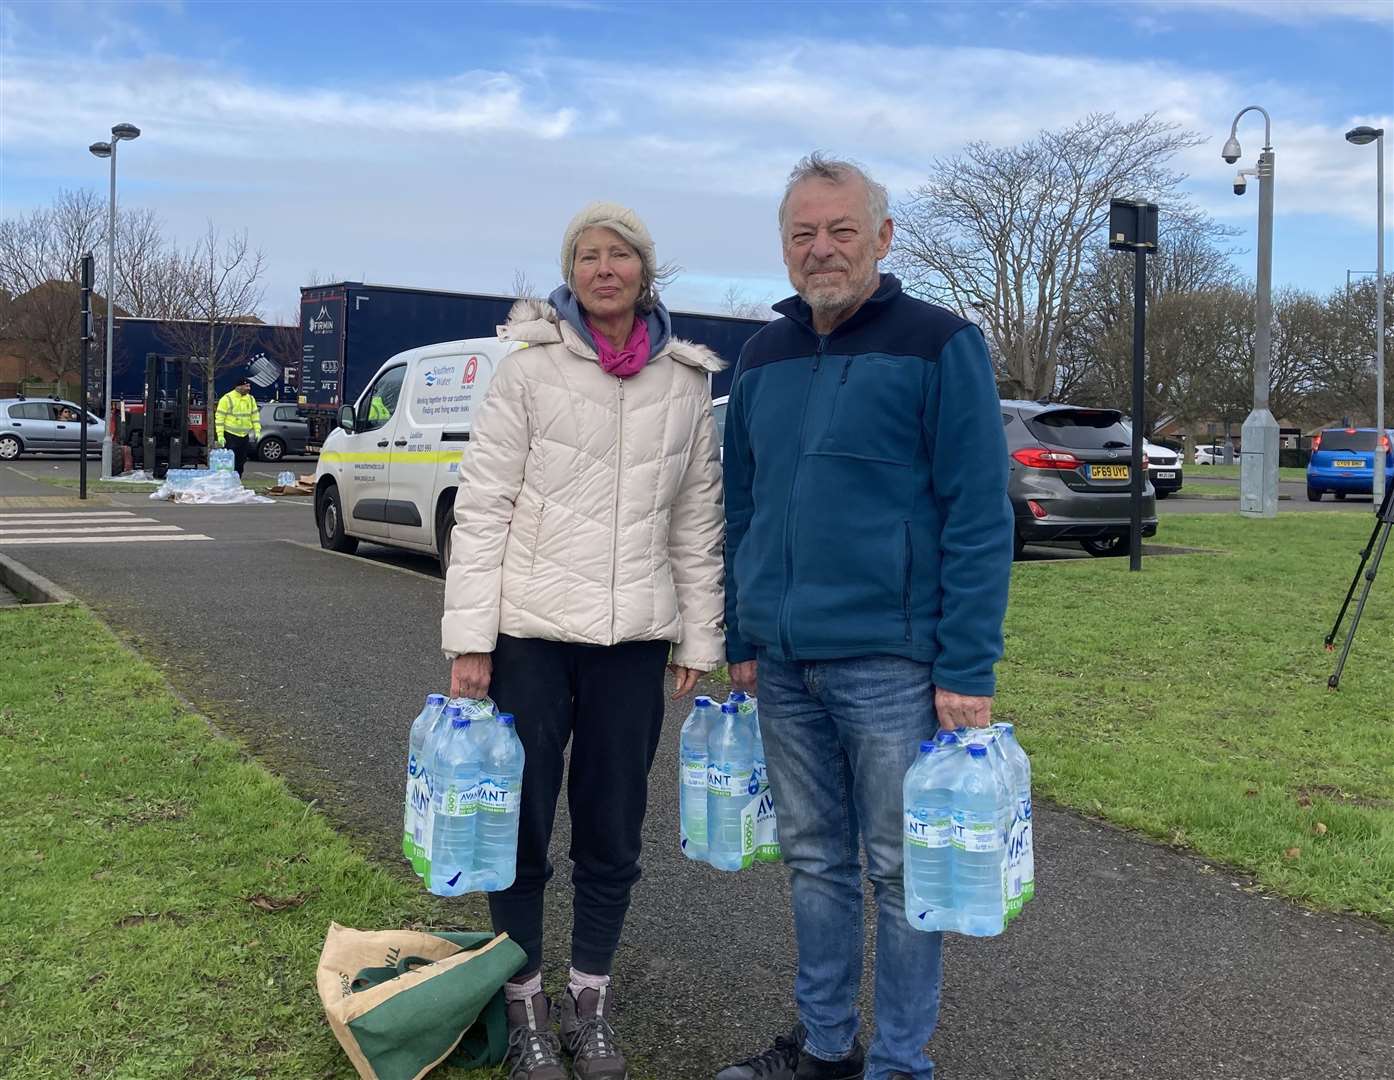 Barbara Luton, who lives in St Peter’s, and John Blackgrove, from Broadstairs, collecting bottled water from Dane Court Grammar School in Broadstairs last year